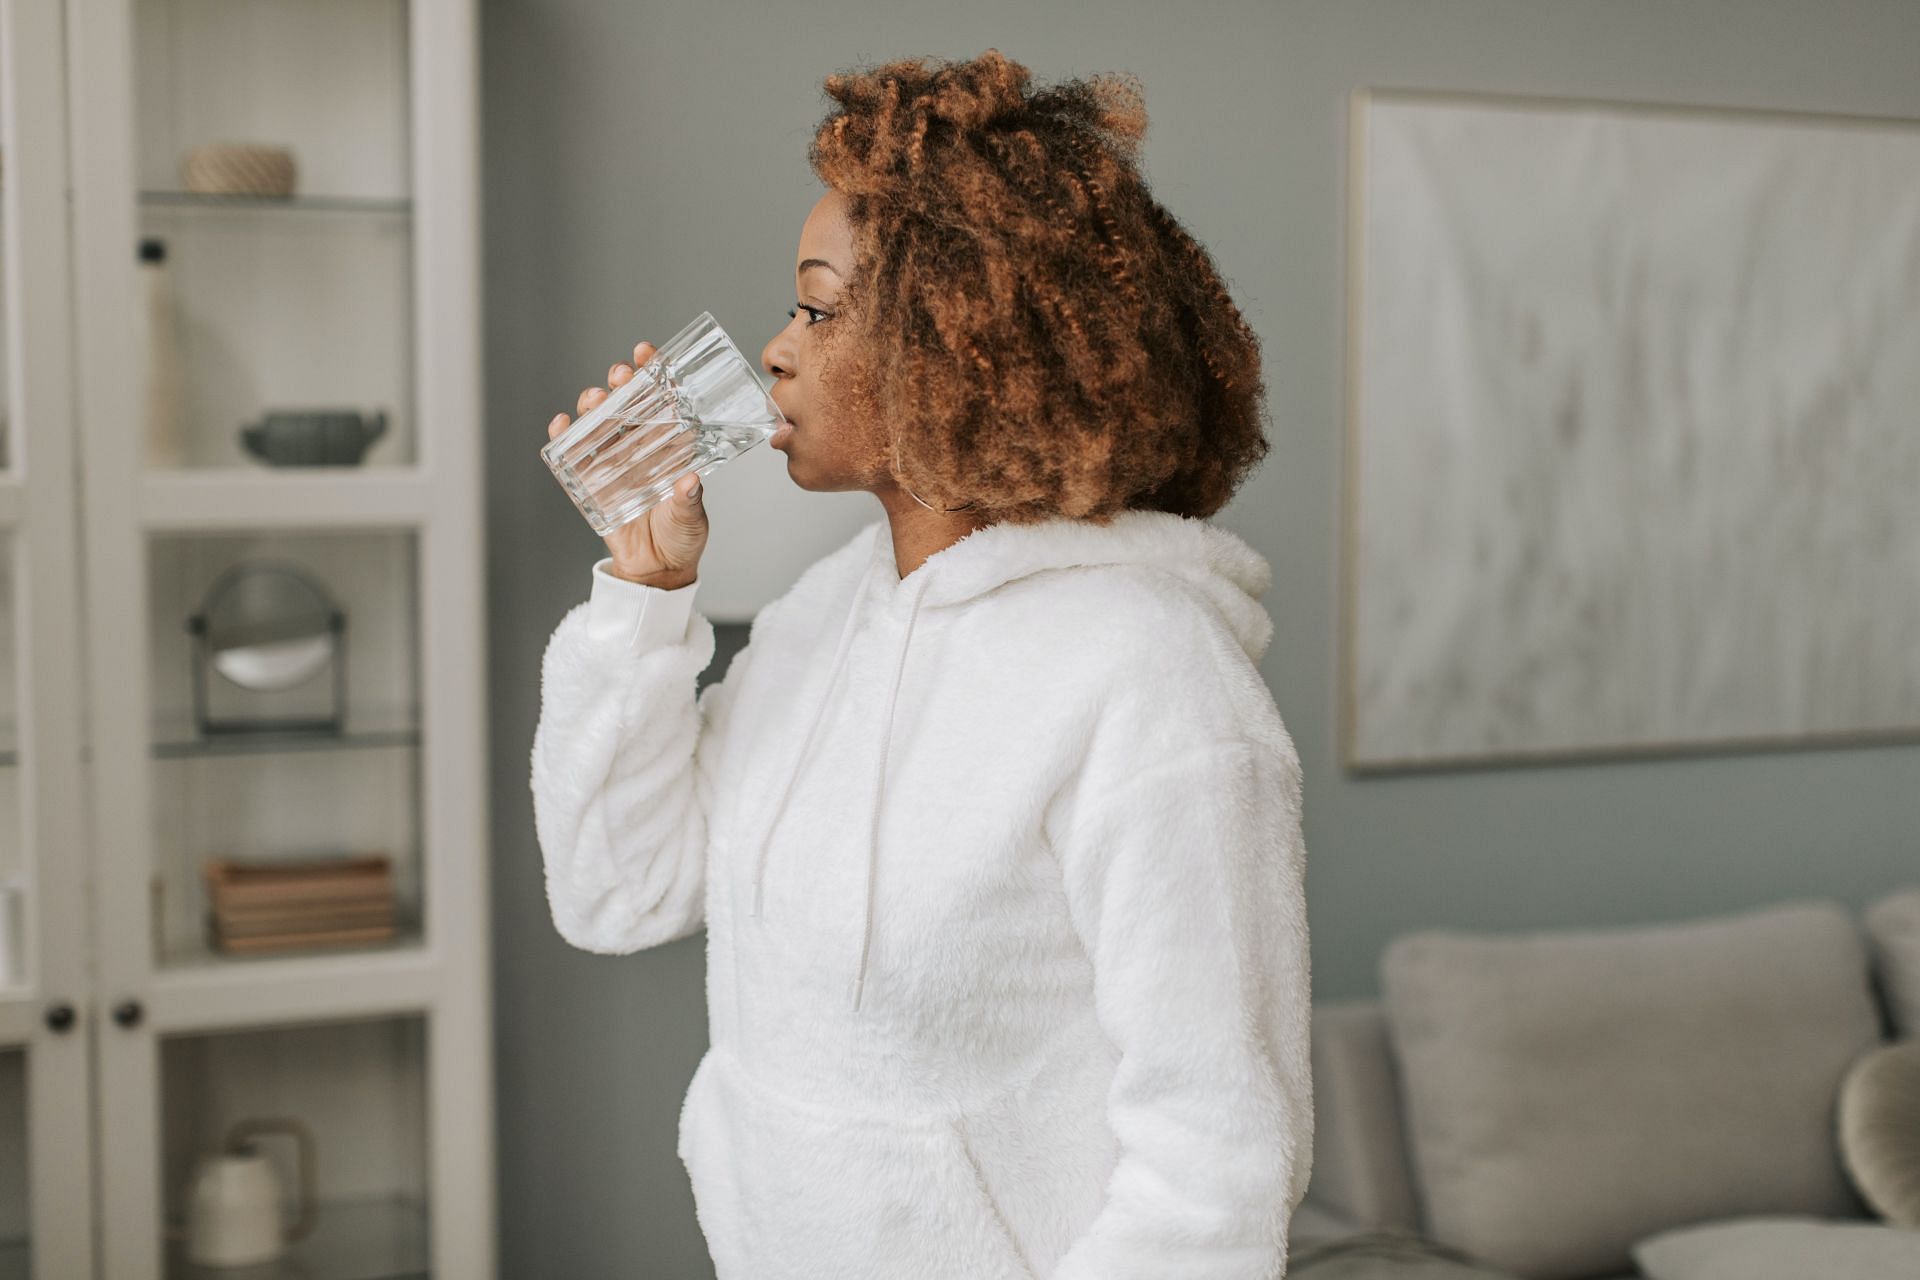 Moderate drinking of water before bed can improve sleep quality. (Image via Pexels/ Vlada Karpovich)